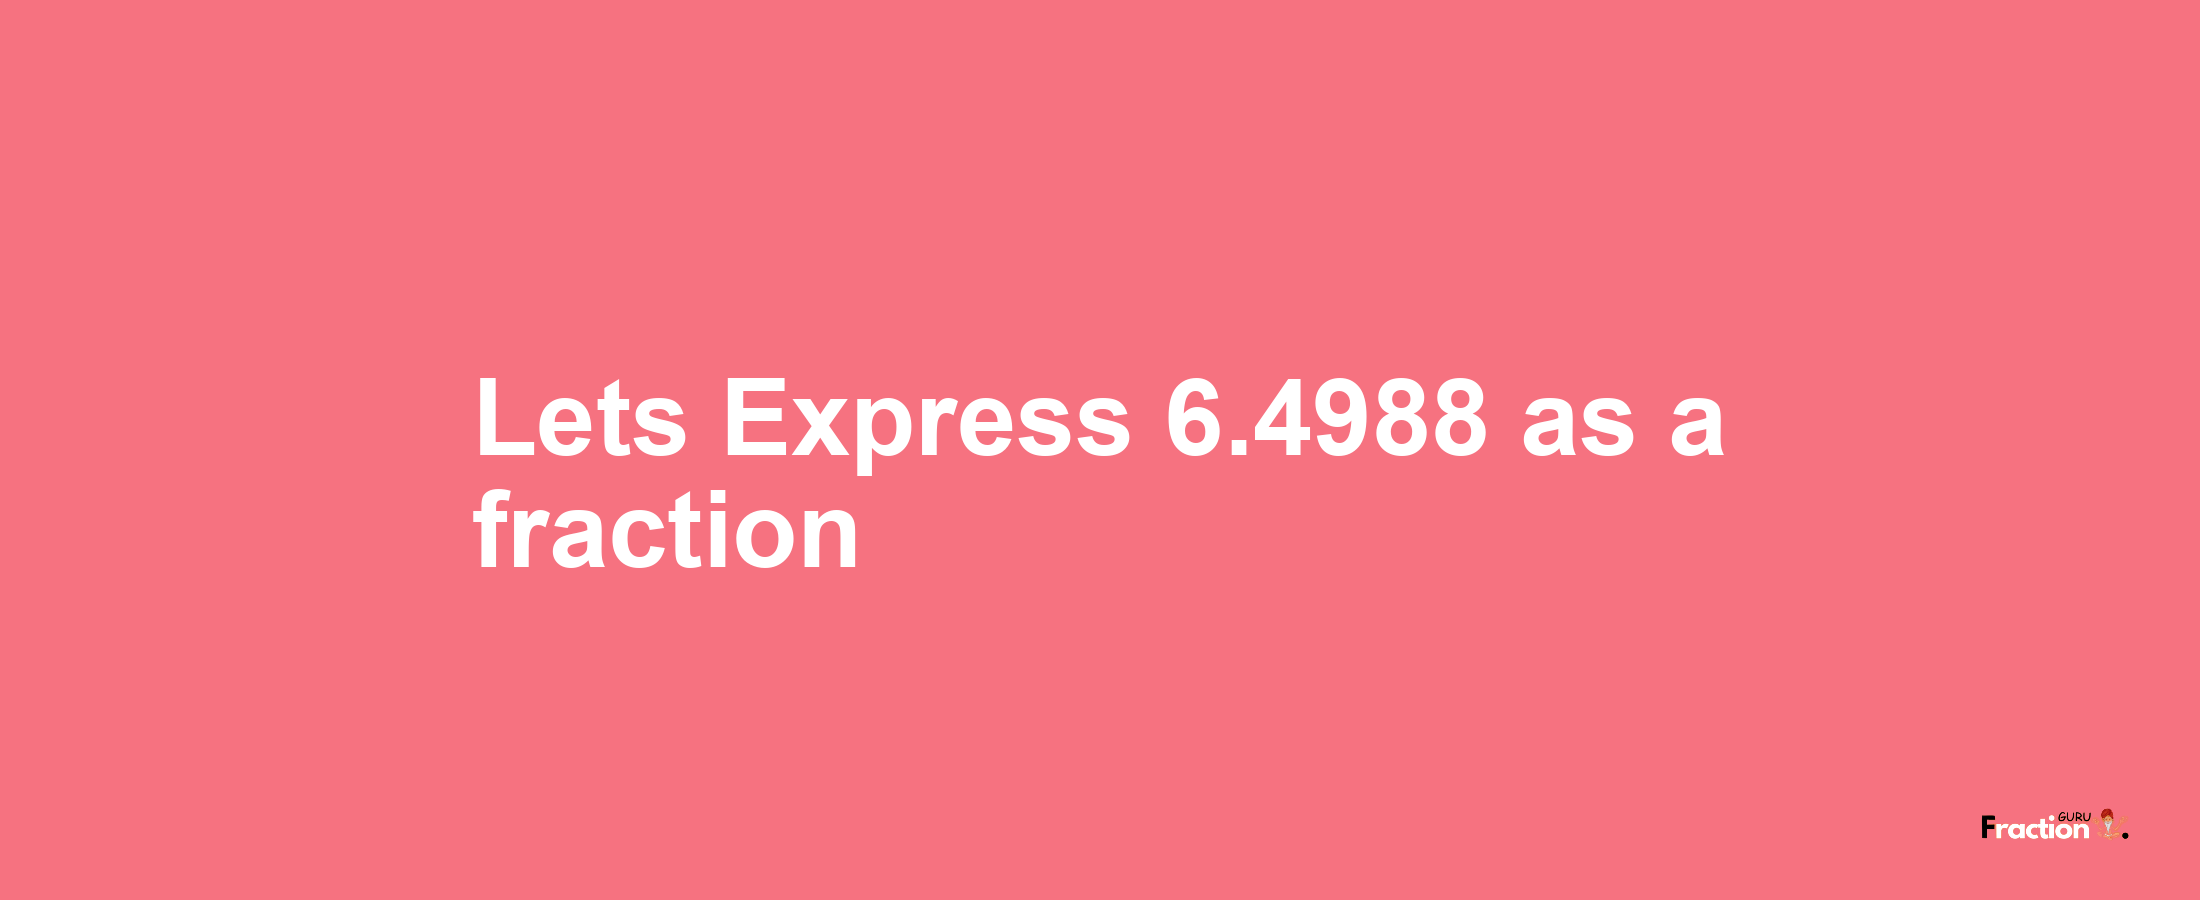 Lets Express 6.4988 as afraction